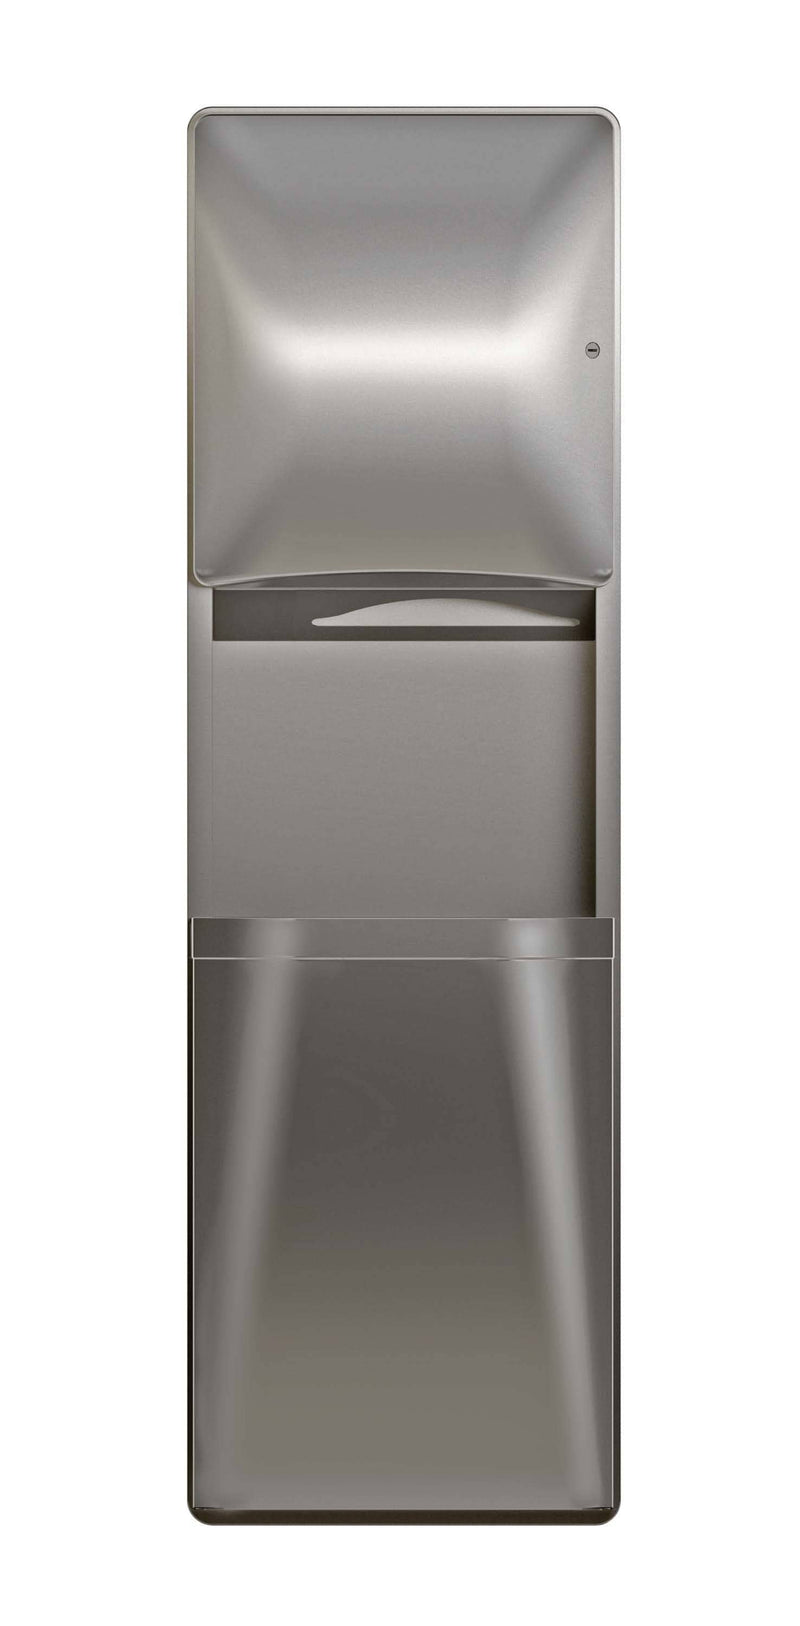 Bradley 2A05-1136 Combination Toilet Paper Dispenser/Waste Receptacle, Semi-Recessed-Mounted, Stainless Steel - TotalRestroom.com